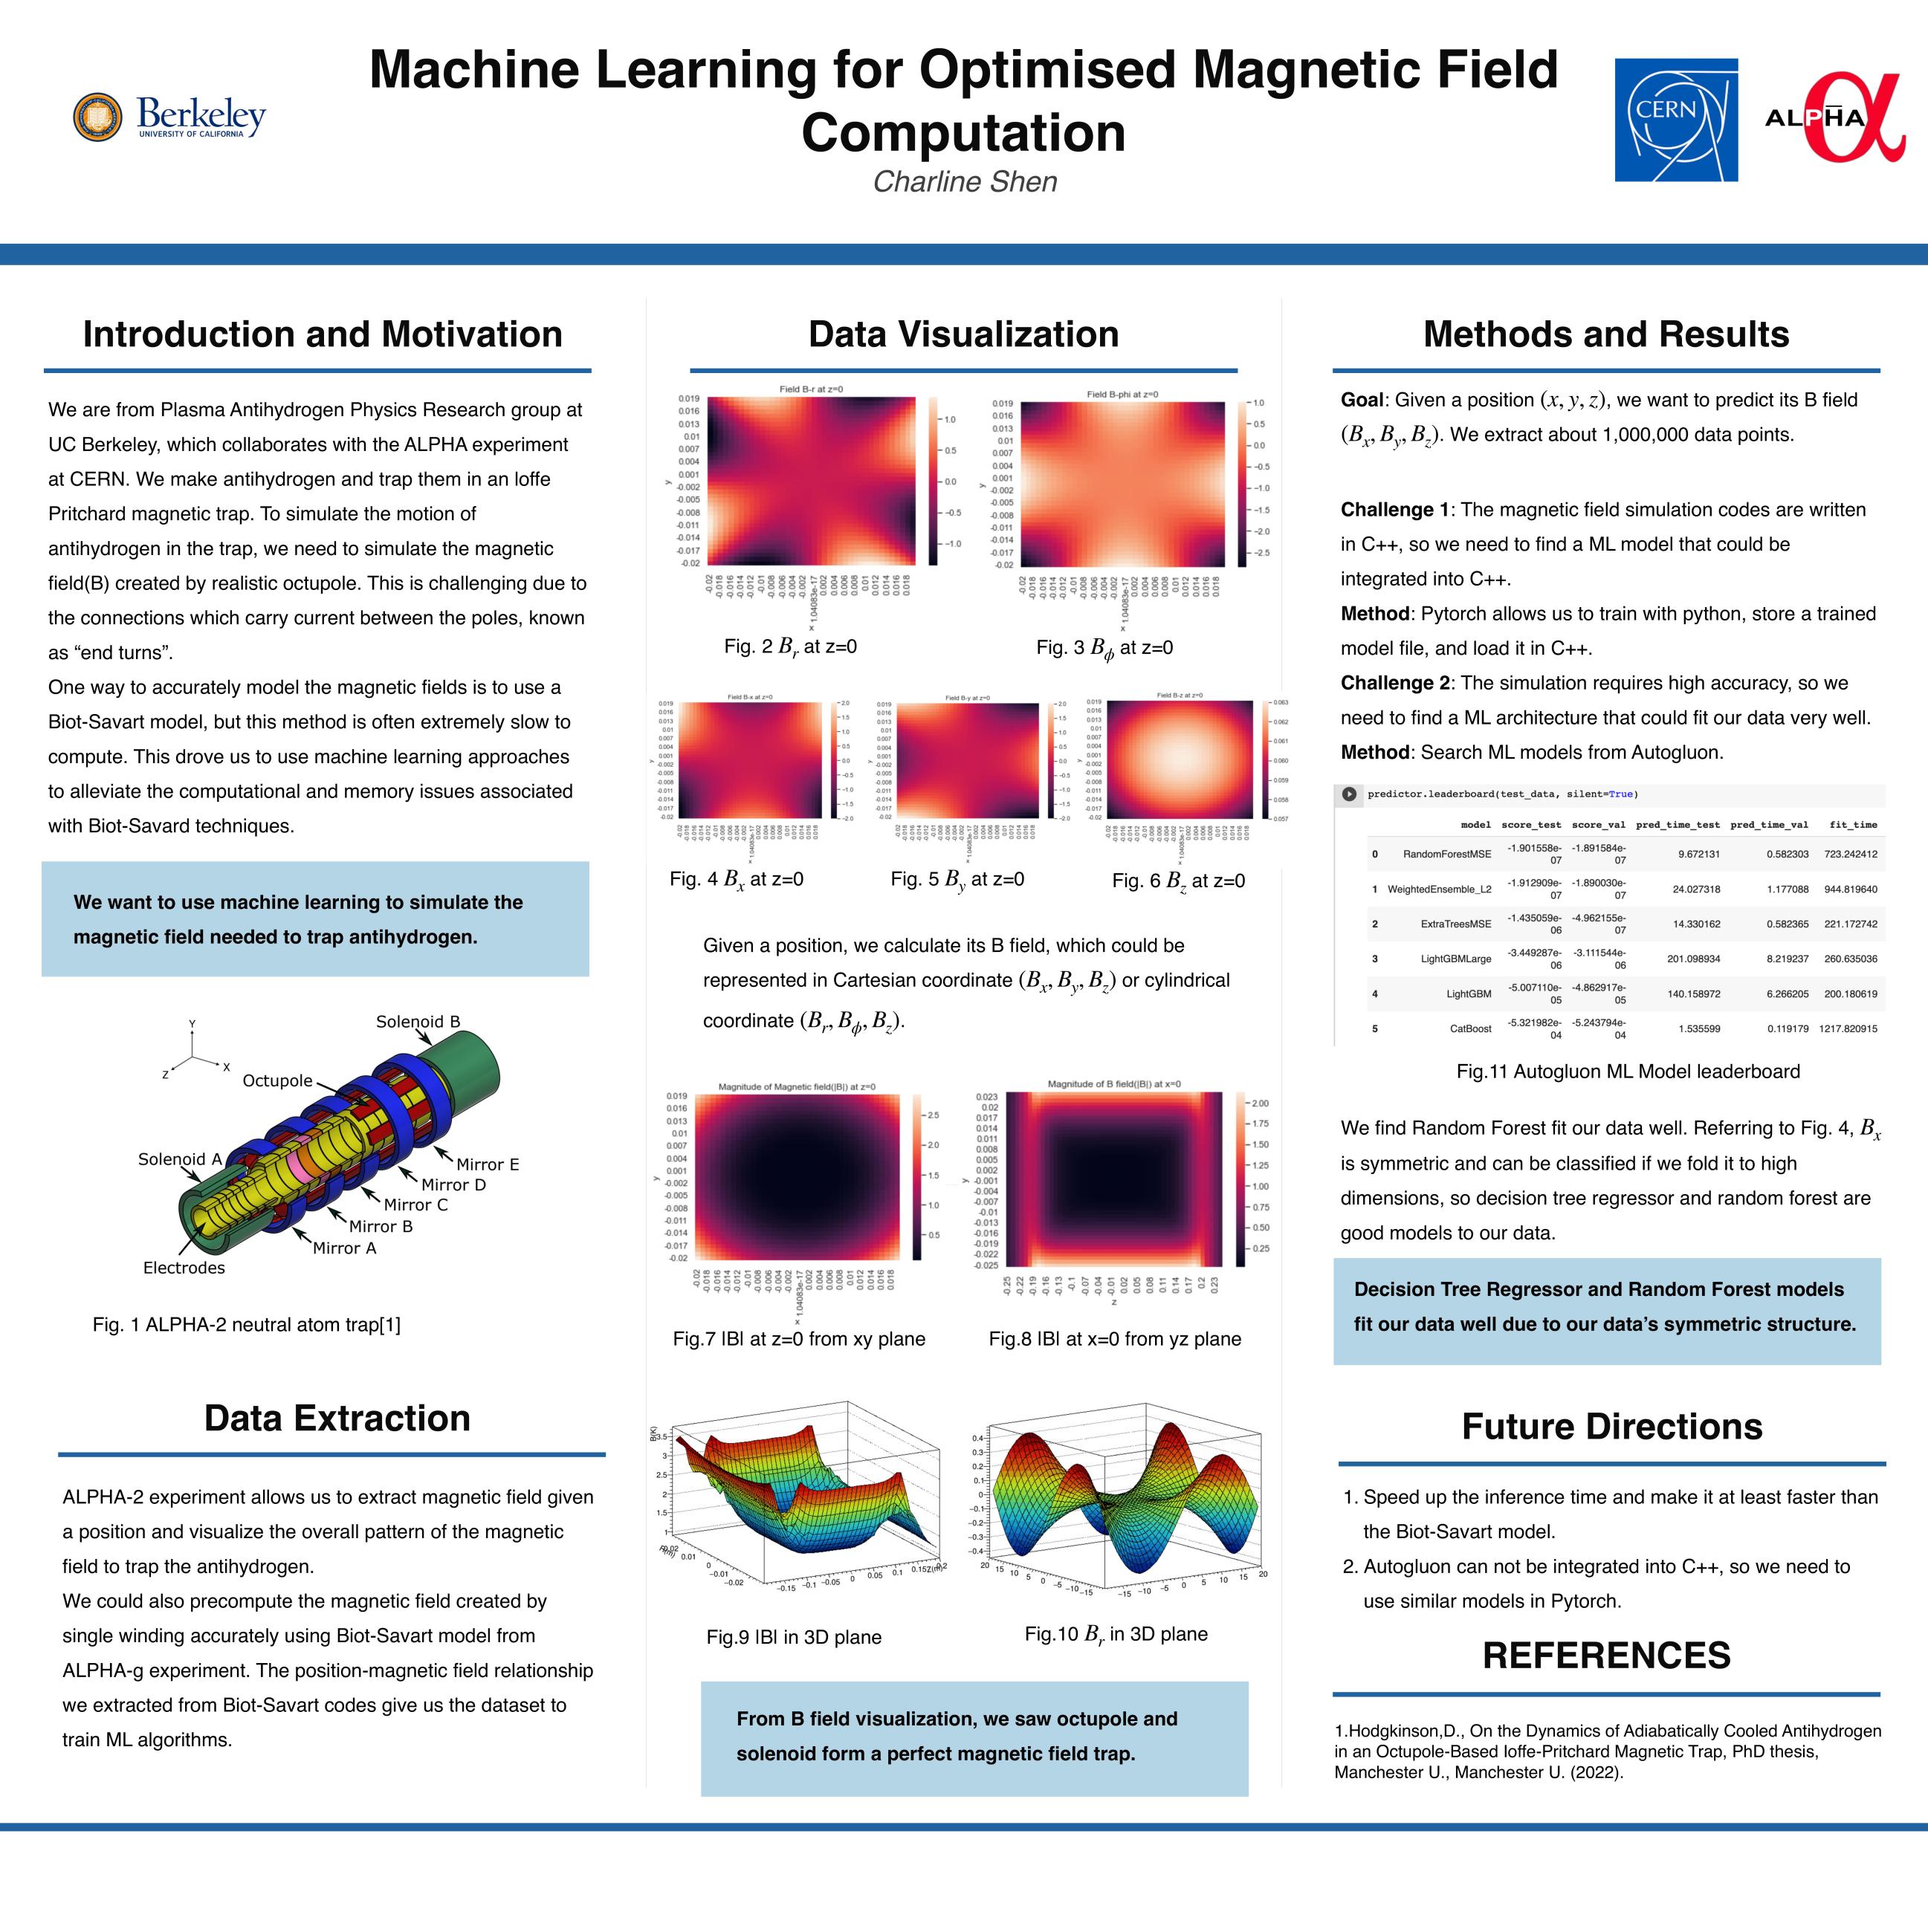 Machine Learning for Optimized Magnetic Field Computation - Spring 2023 Discovery Project